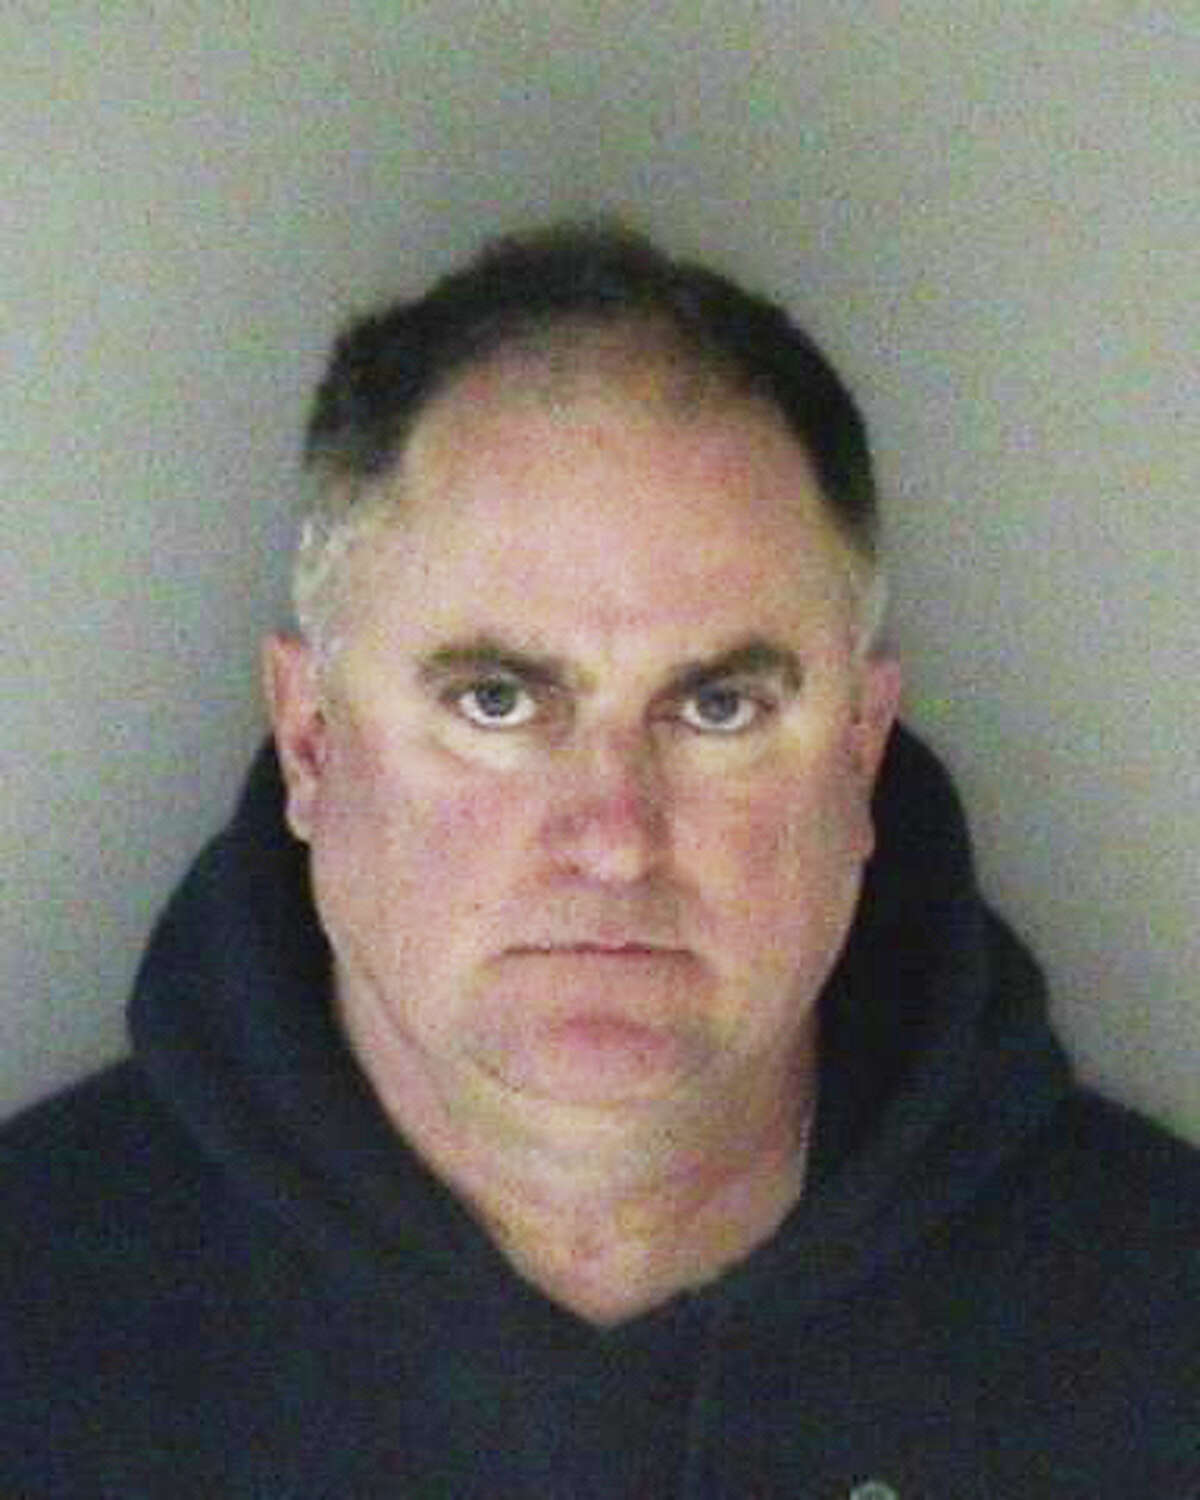 Daniel Black, 49, was booked Tuesday on five misdemeanor charges for his alleged involvement with a sexually exploited teenager.